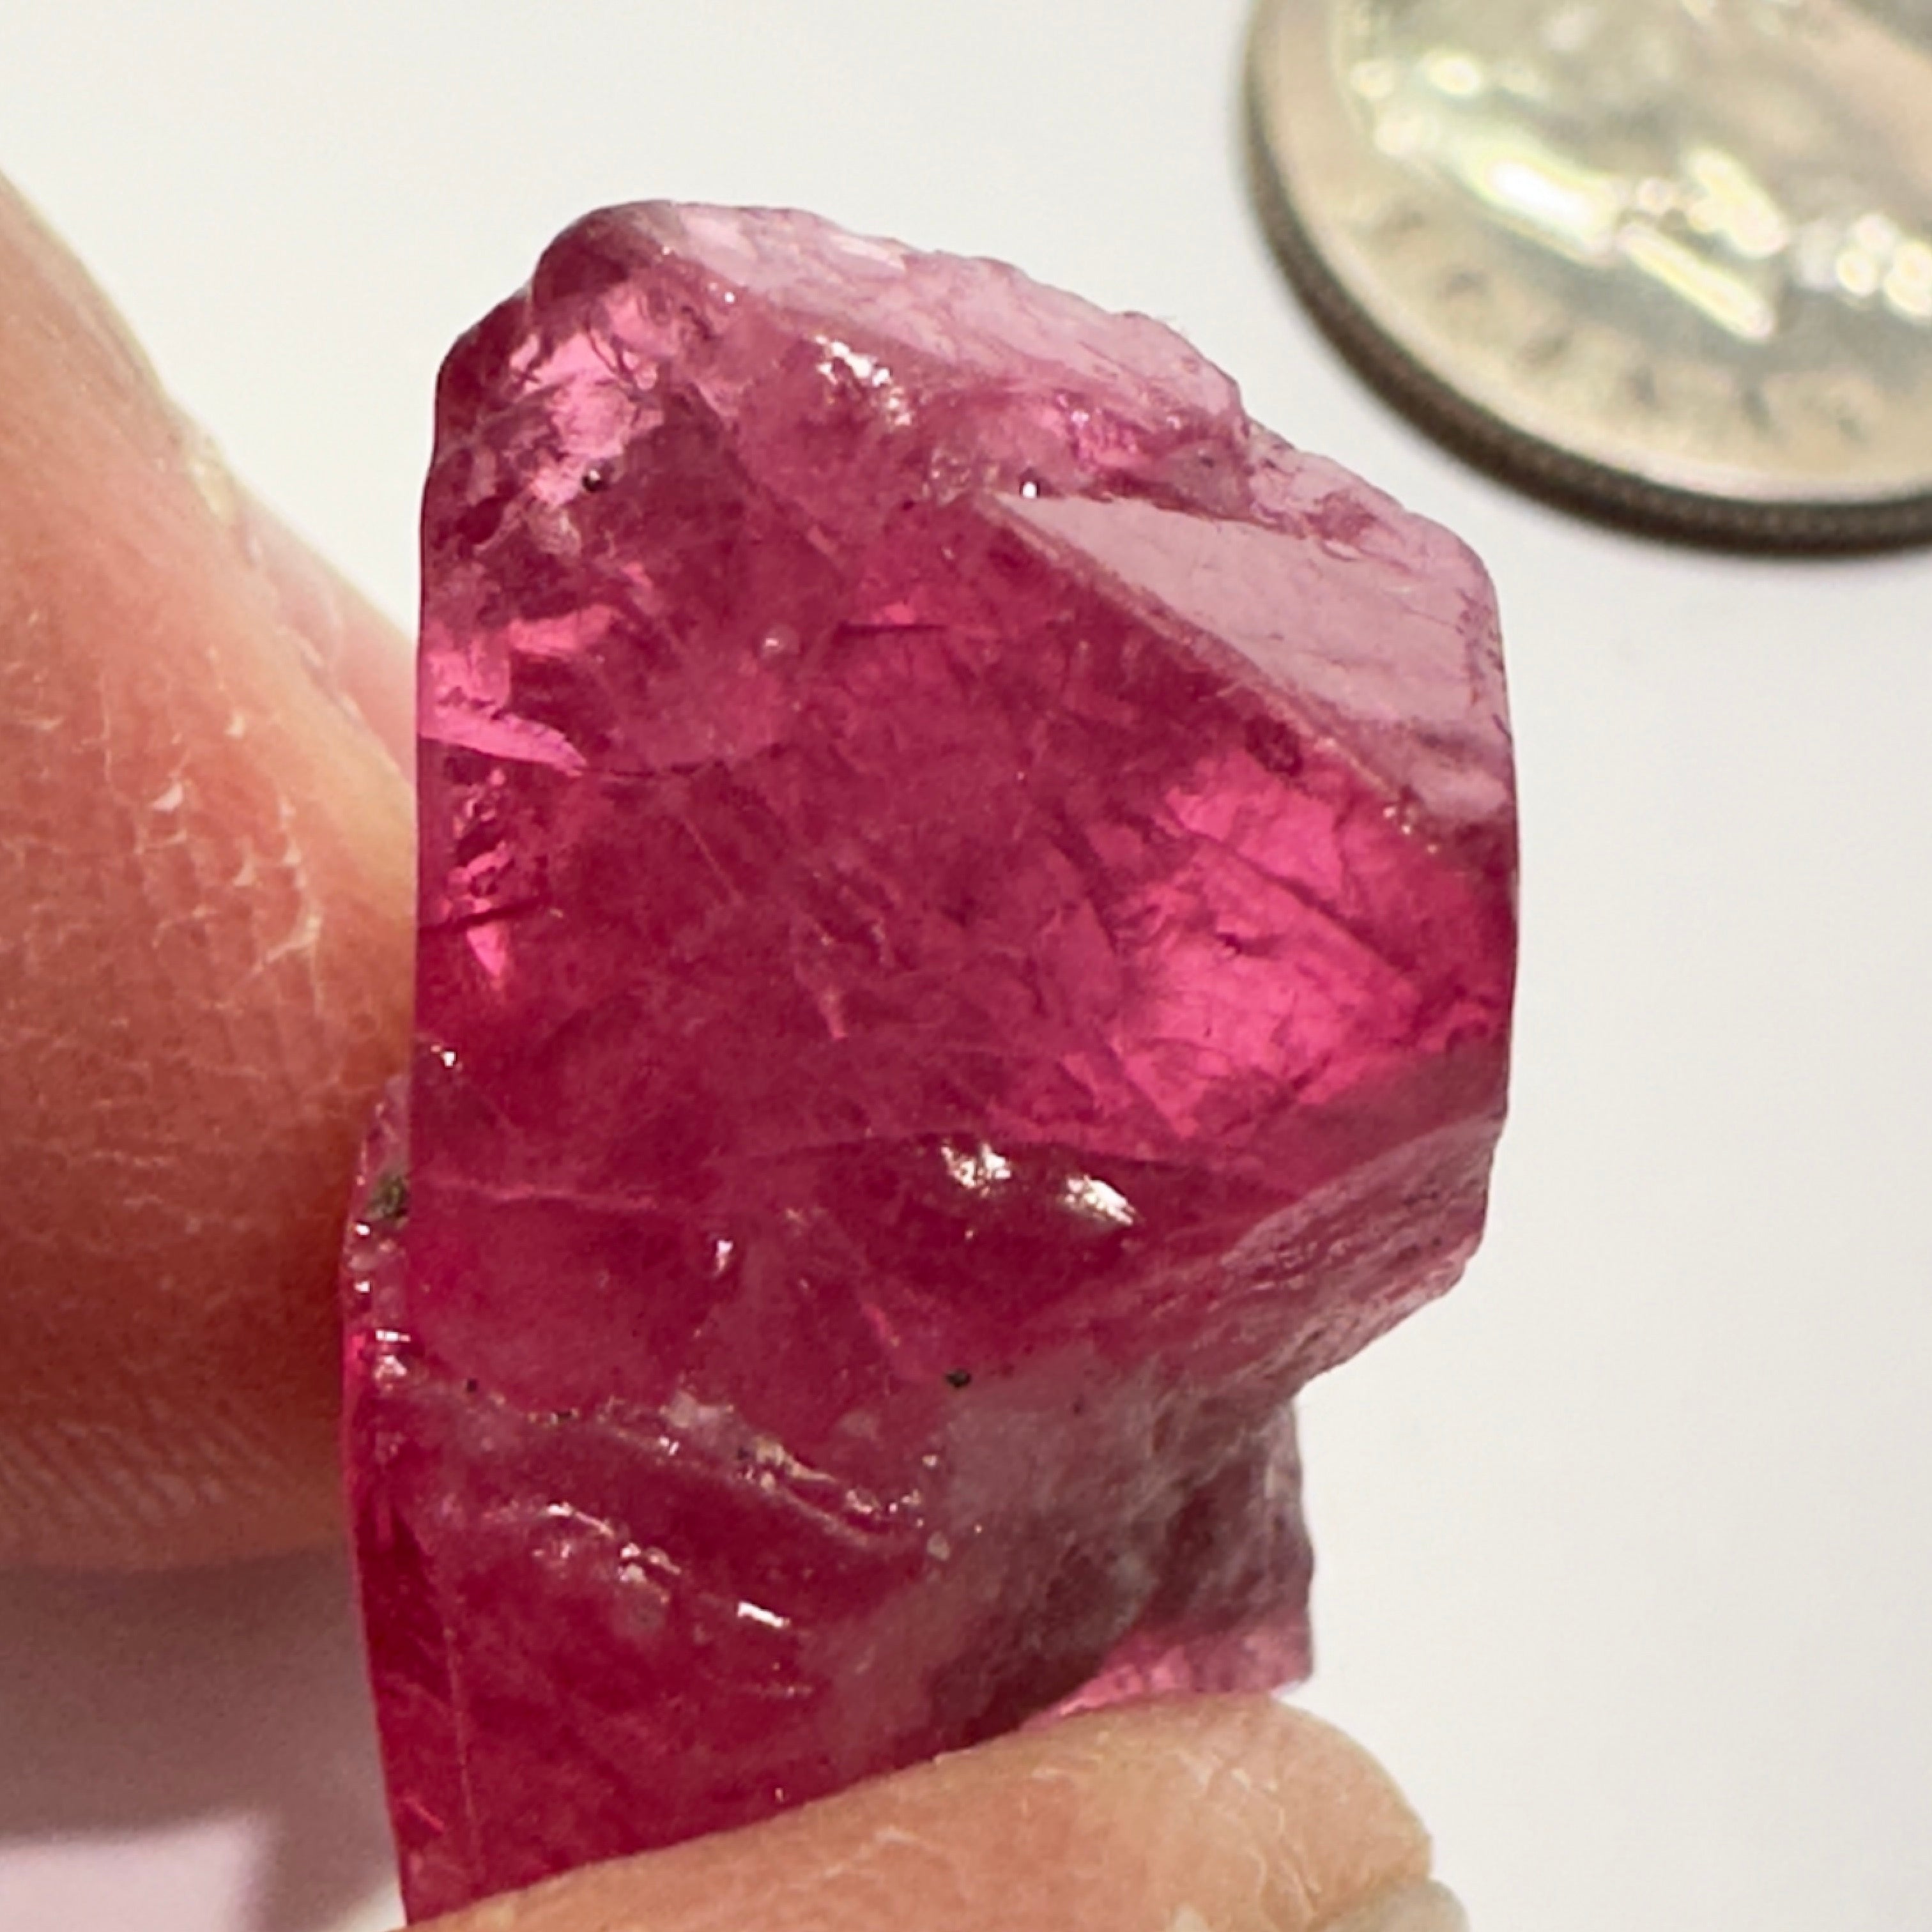 22.51ct Mahenge Red Spinel Crystal, WITH SMALL FACETABLE PORTIONS, Tanzania, Untreated, Unheated. 17.2 x 11.4 x 12.2 mm